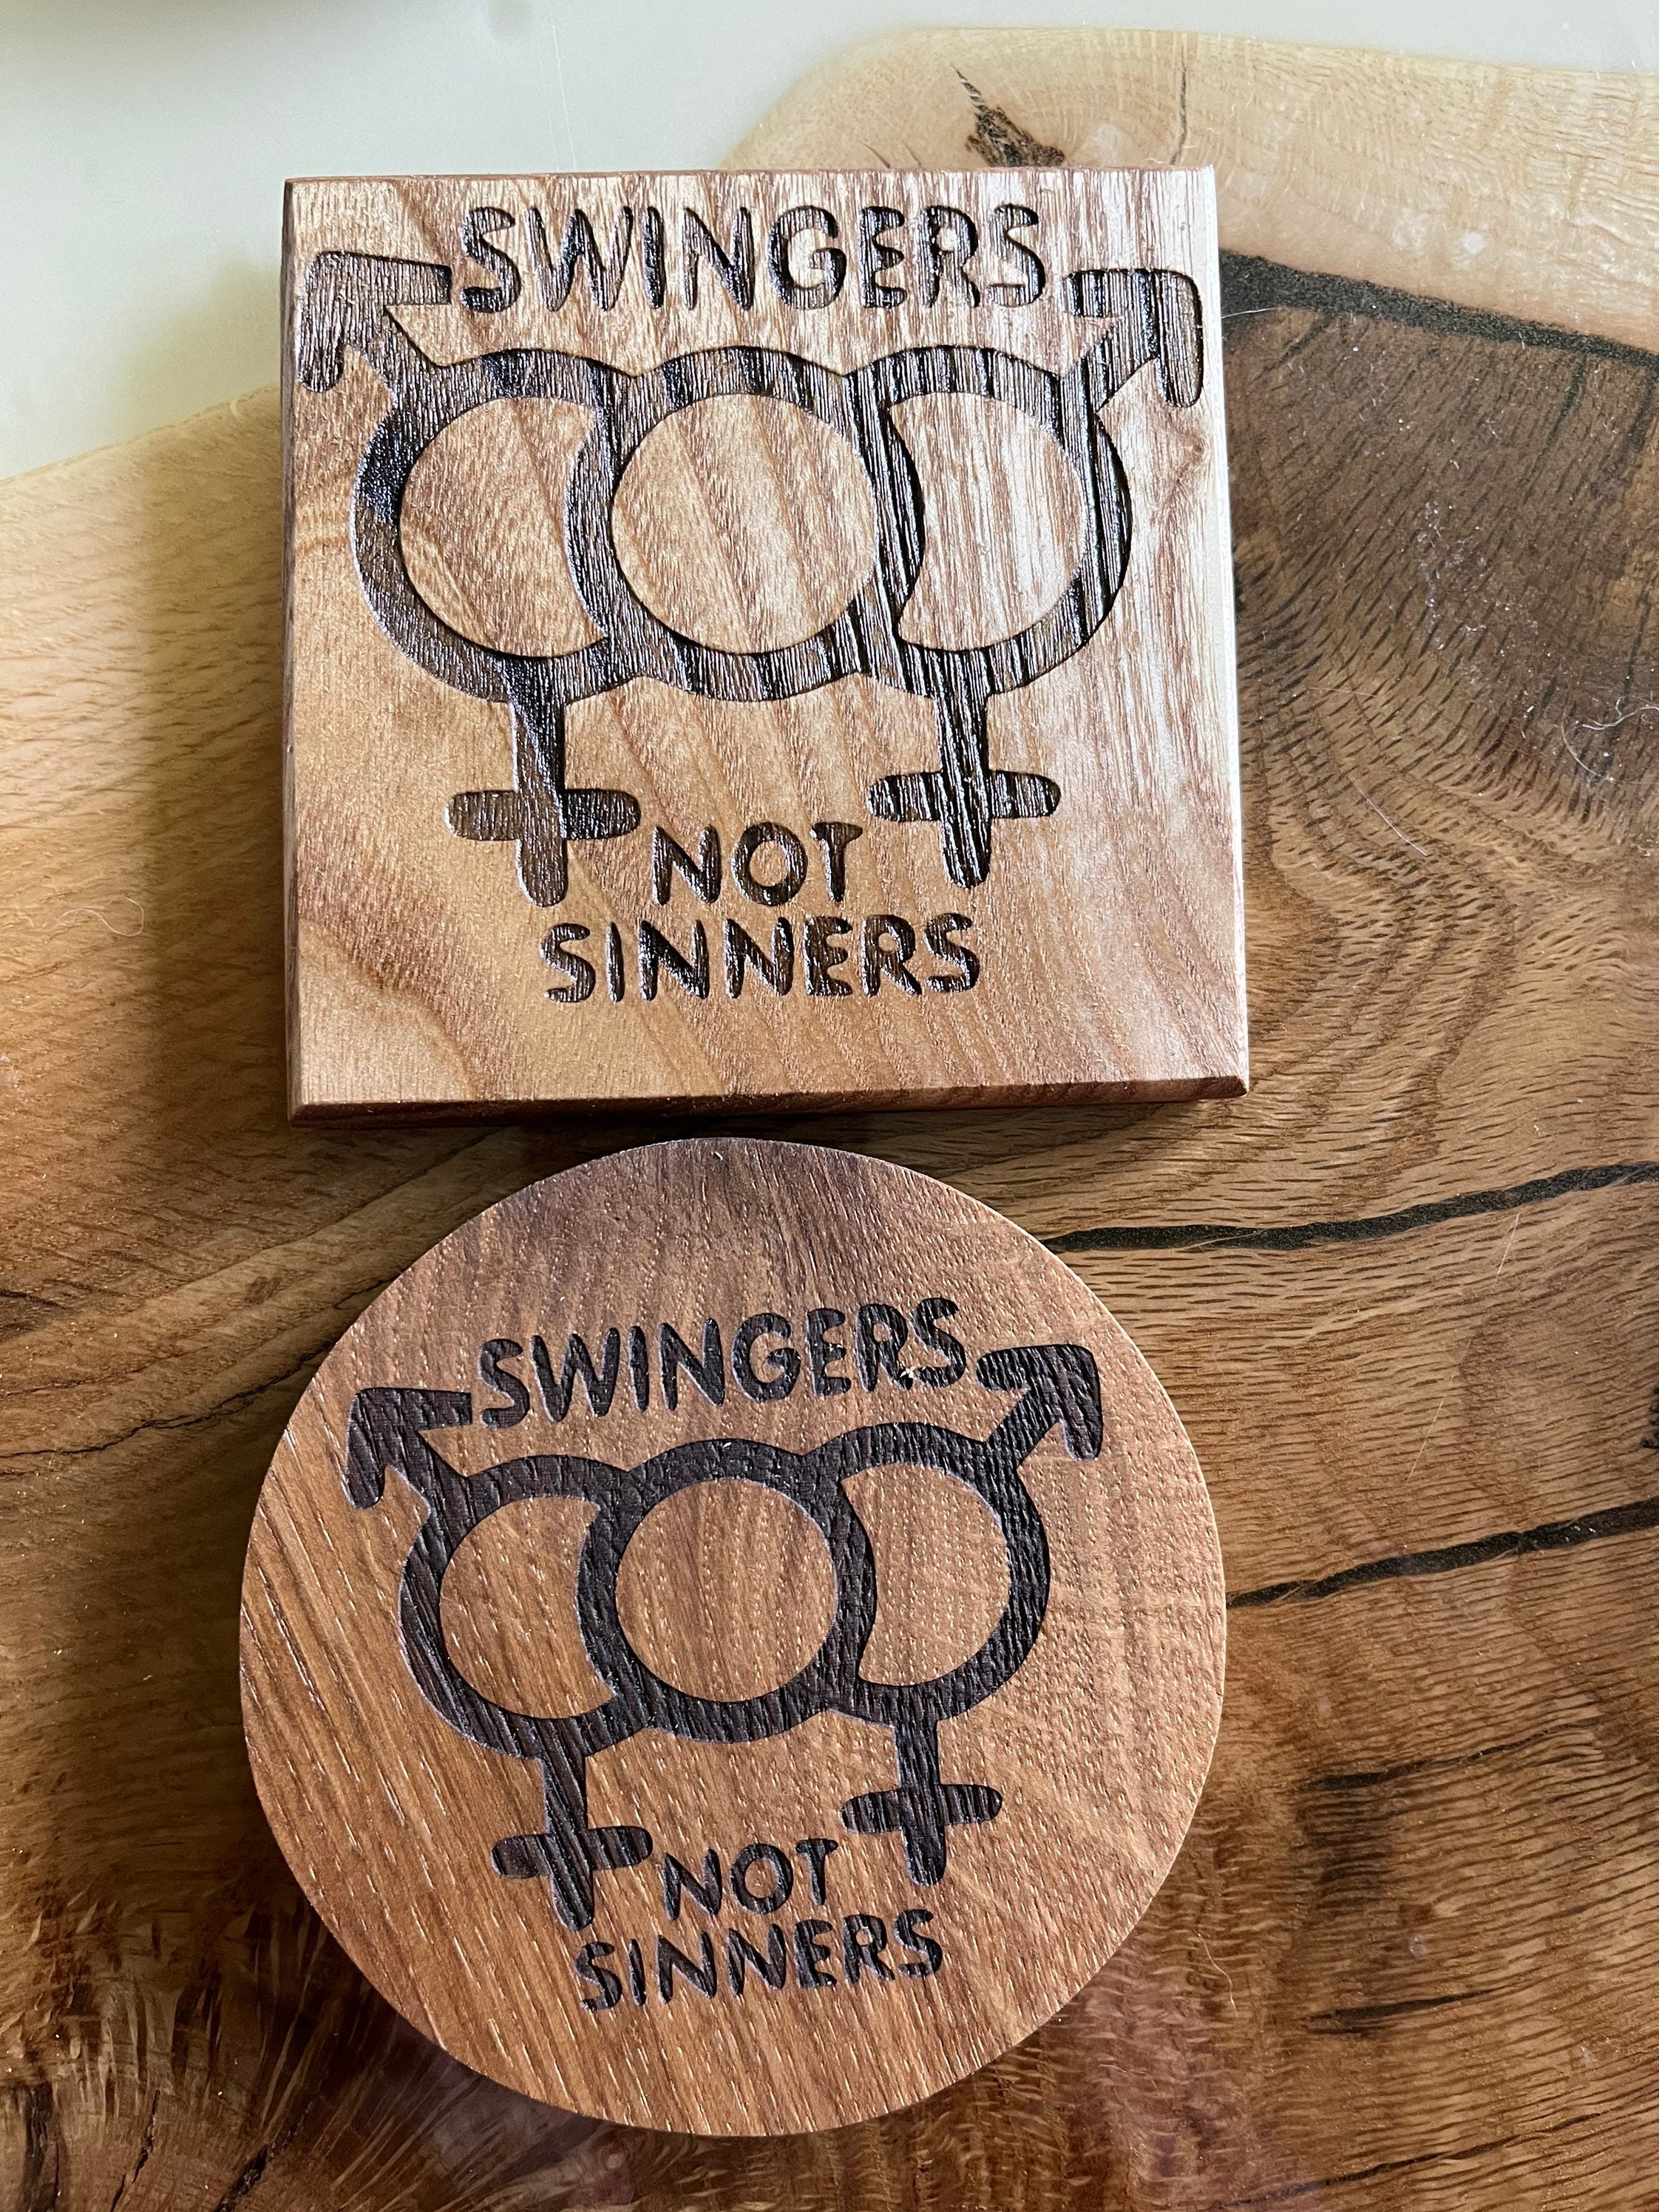 Swingers Not Sinners image pic